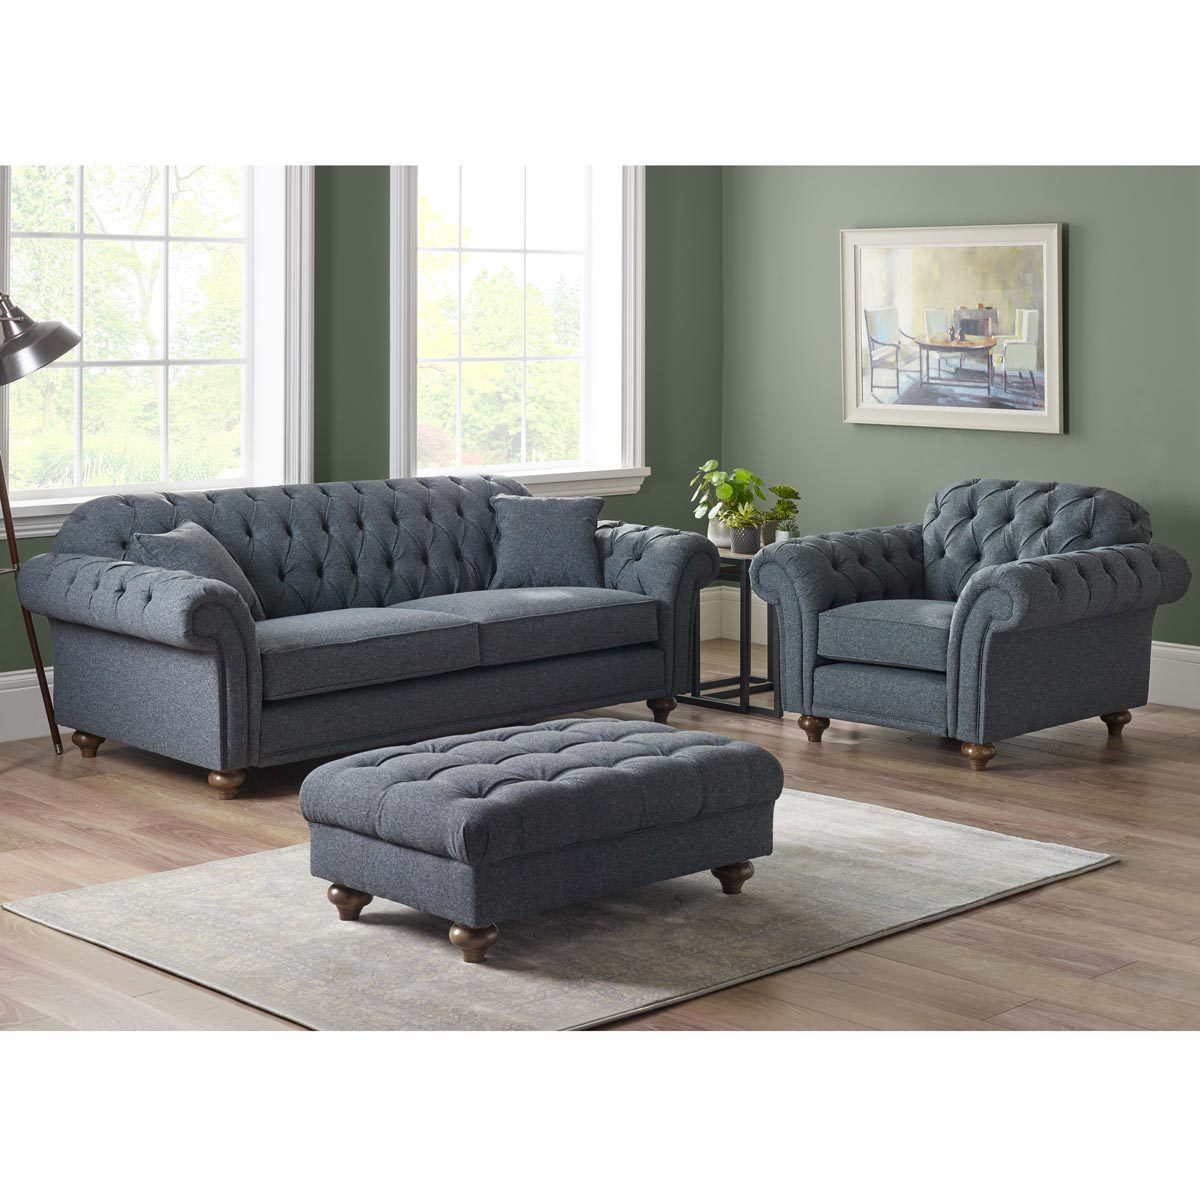 Bordeaux Button Back 4 Seater Fabric Sofa, Grey - Signature Retail Stores